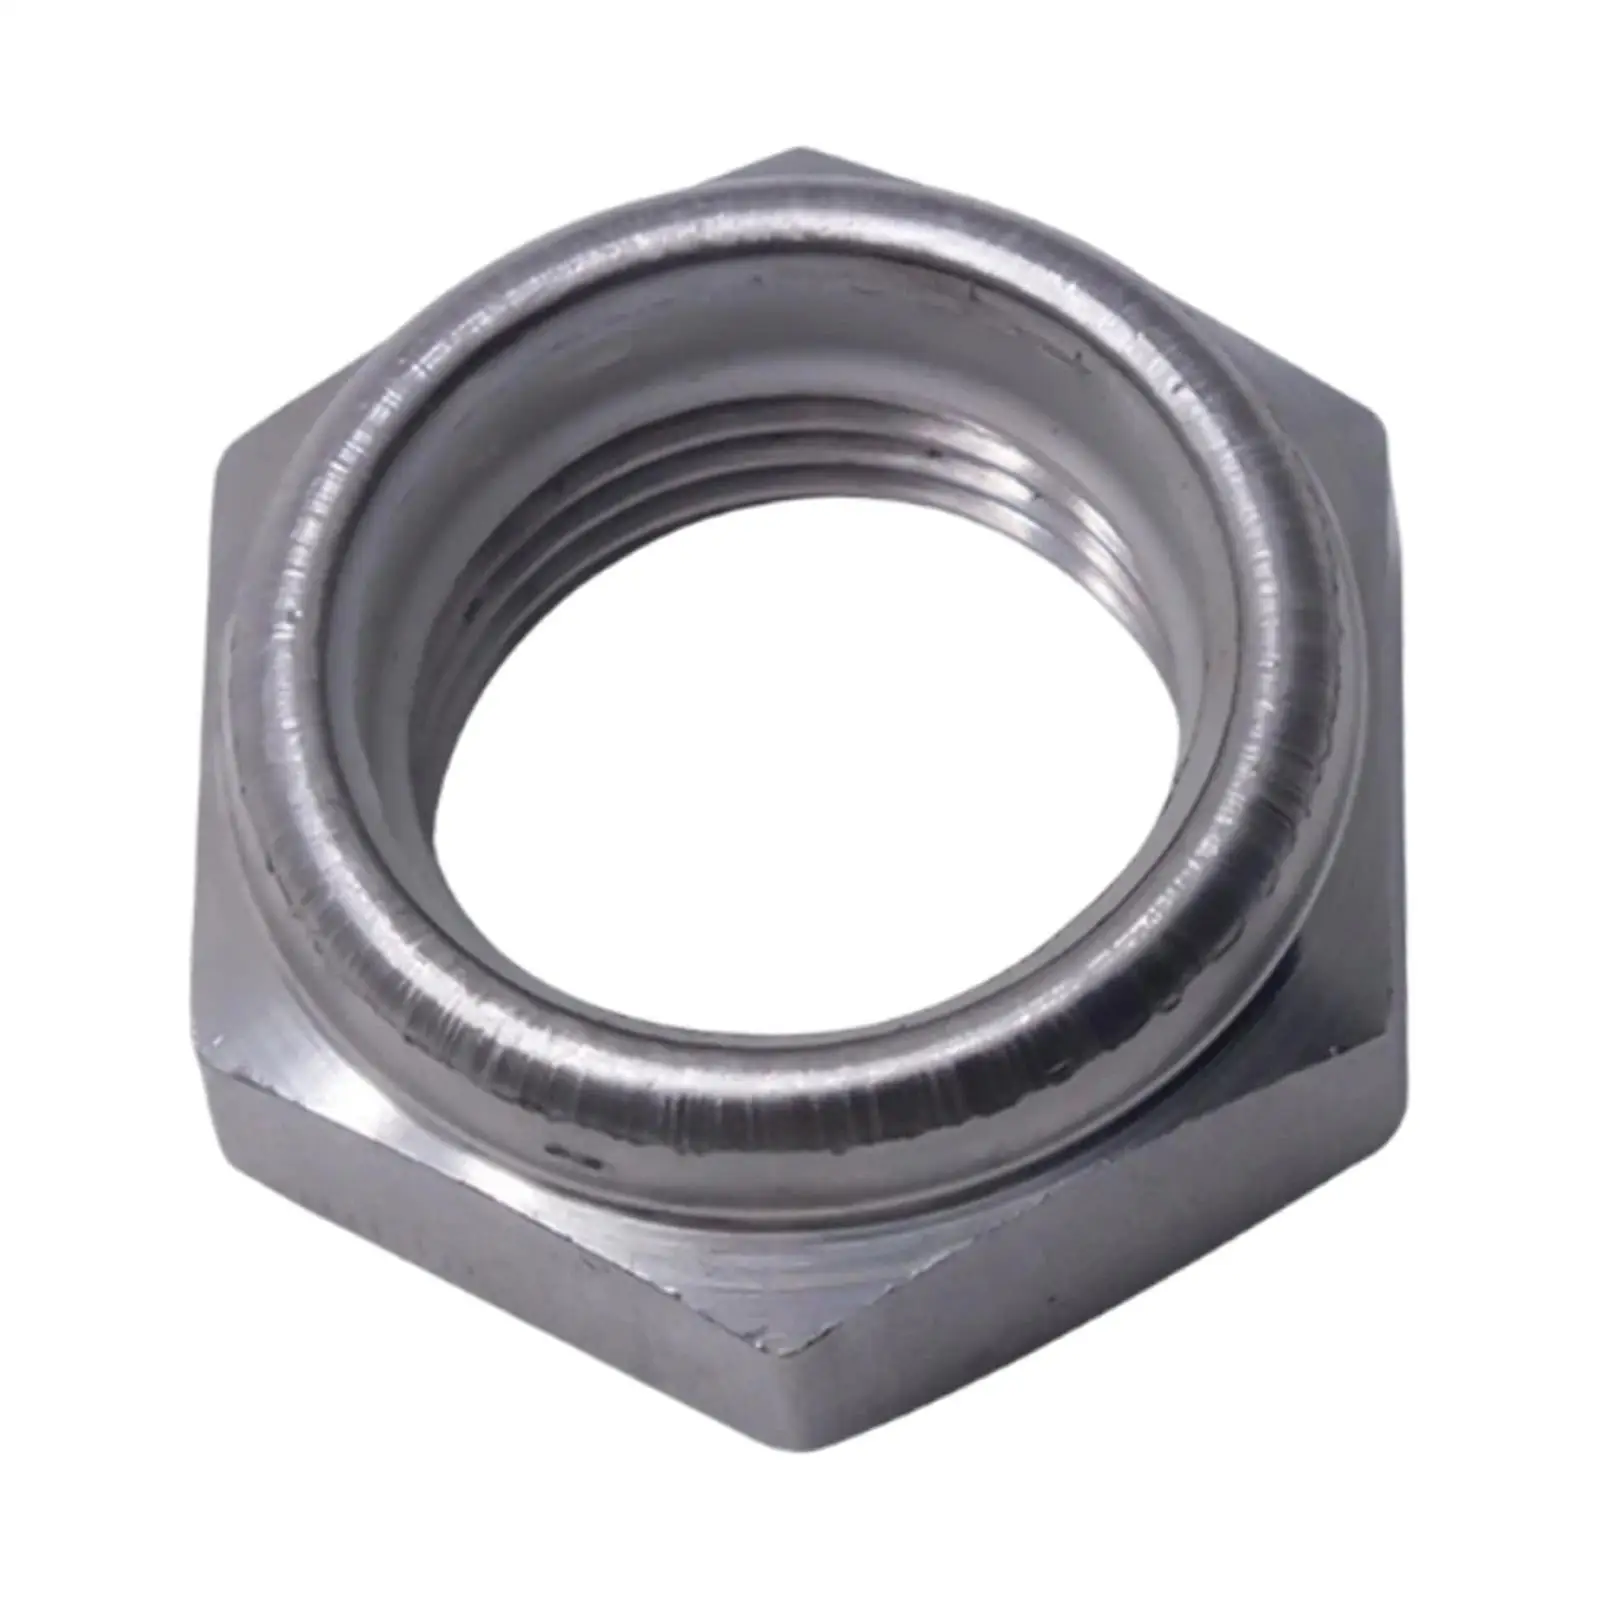 Replacement Self Locking Nut 90185-22043-00 Stainless for Parsun HDX